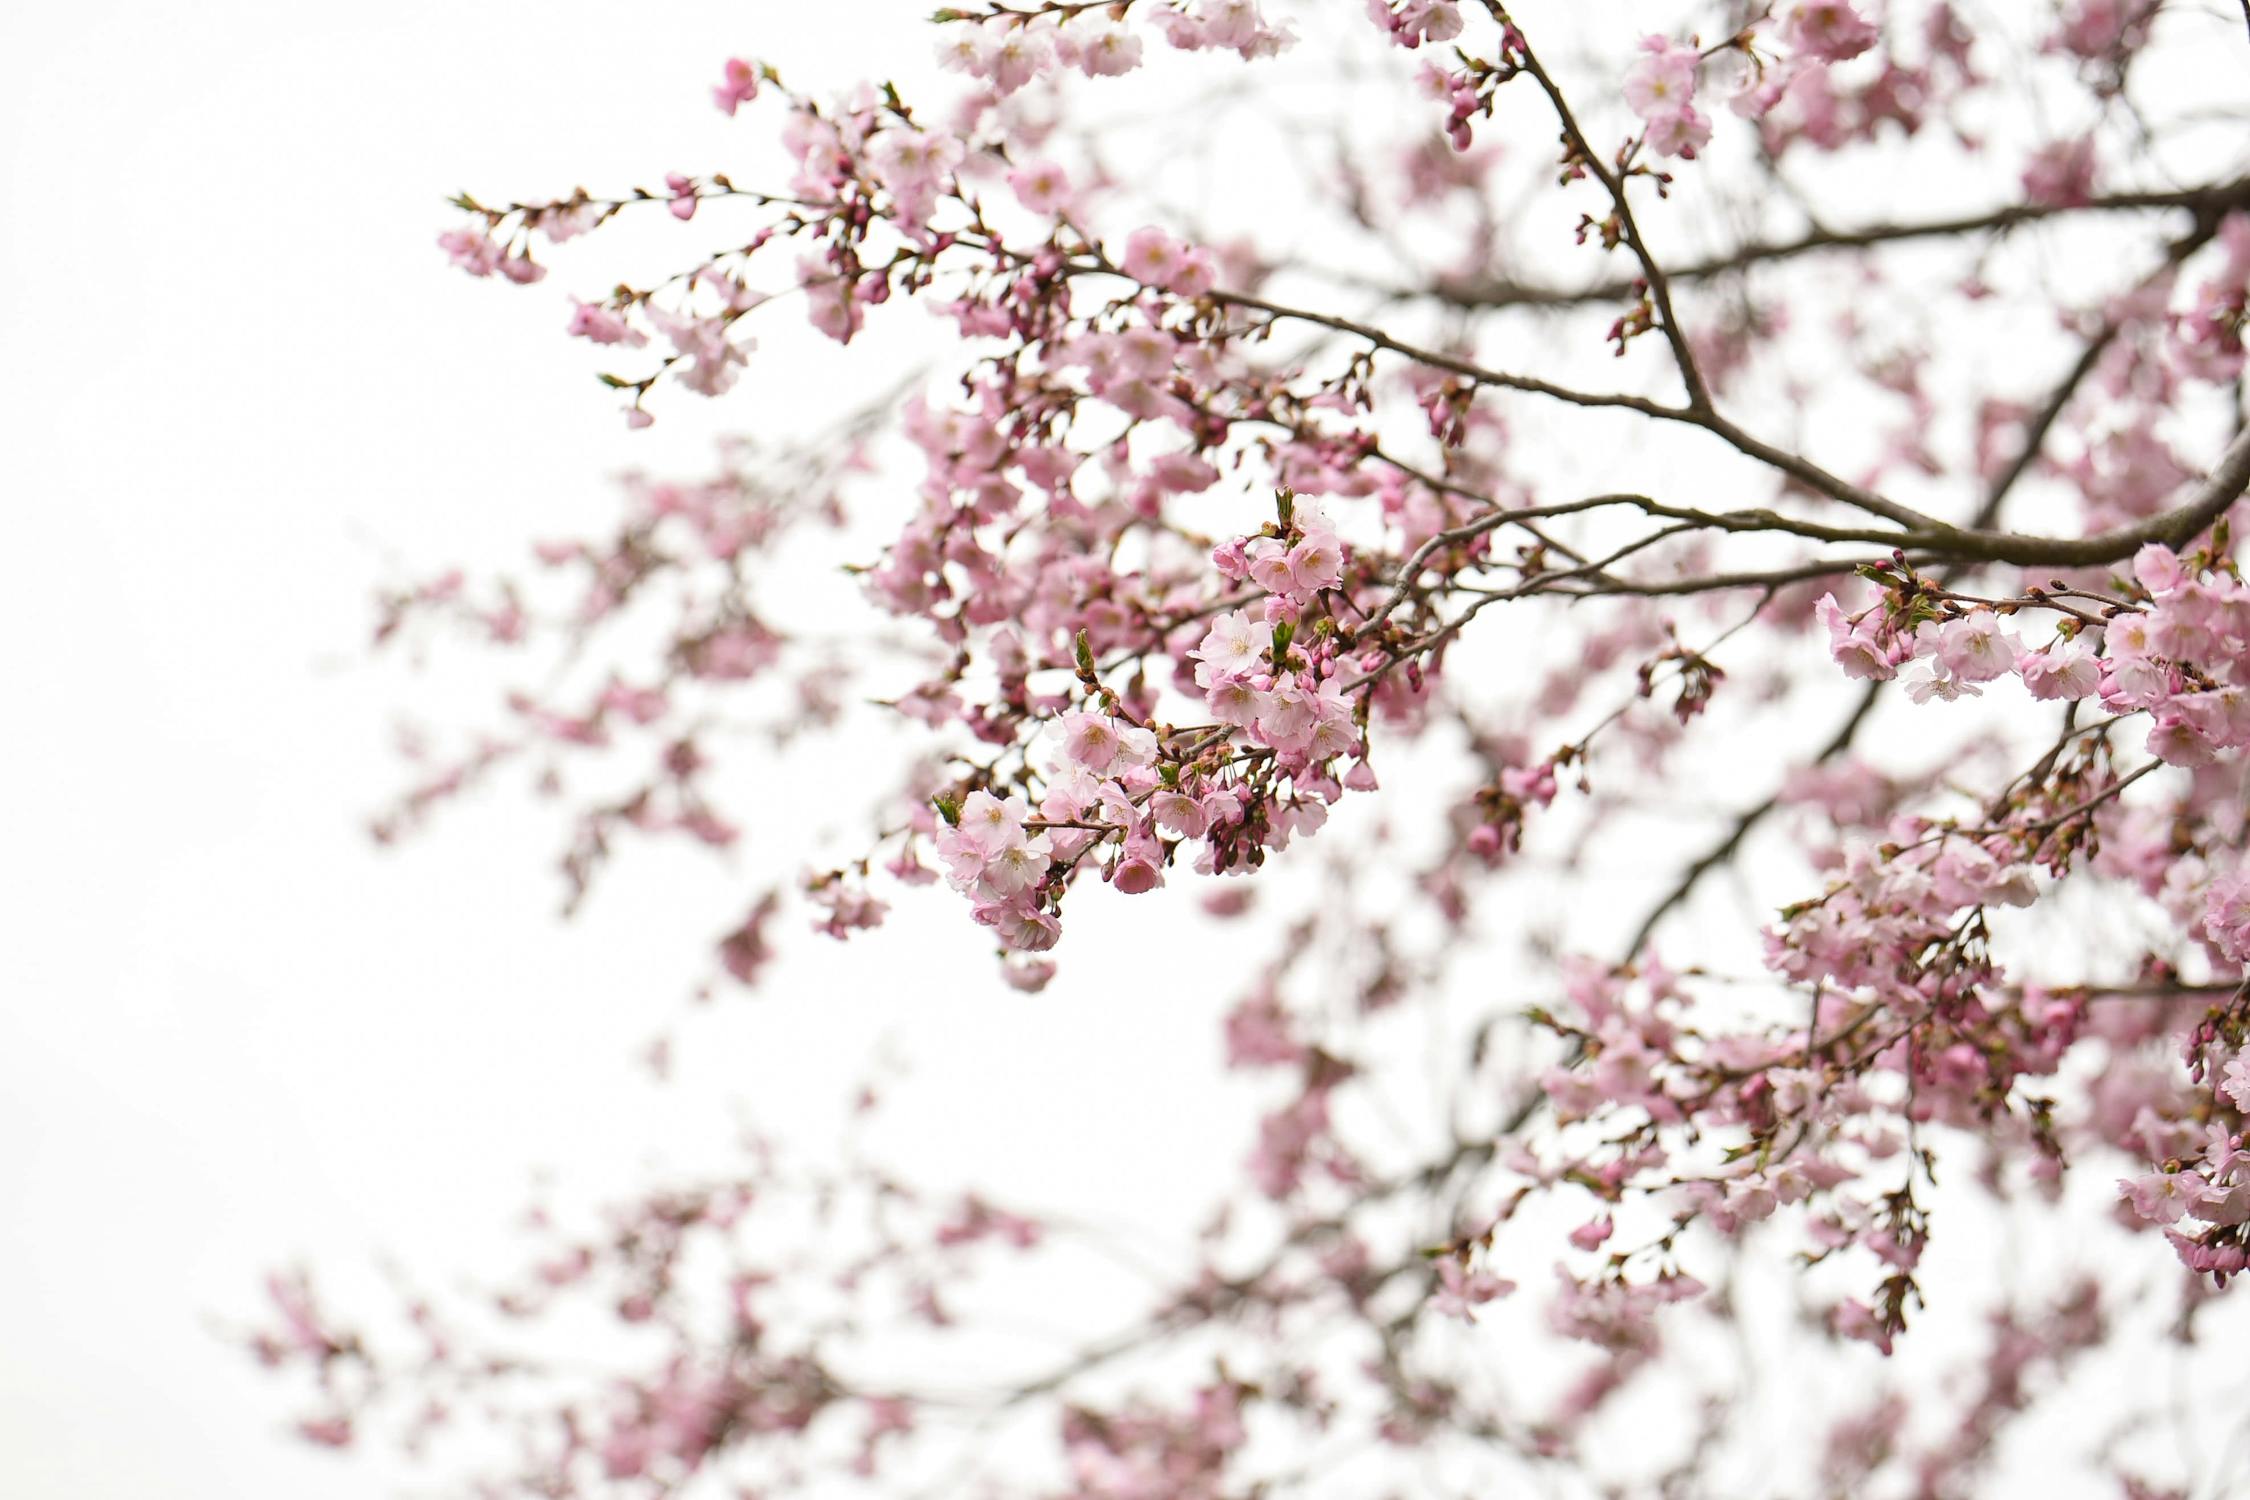 Pink Cherry Blossoms on White Background · Free Stock Photo